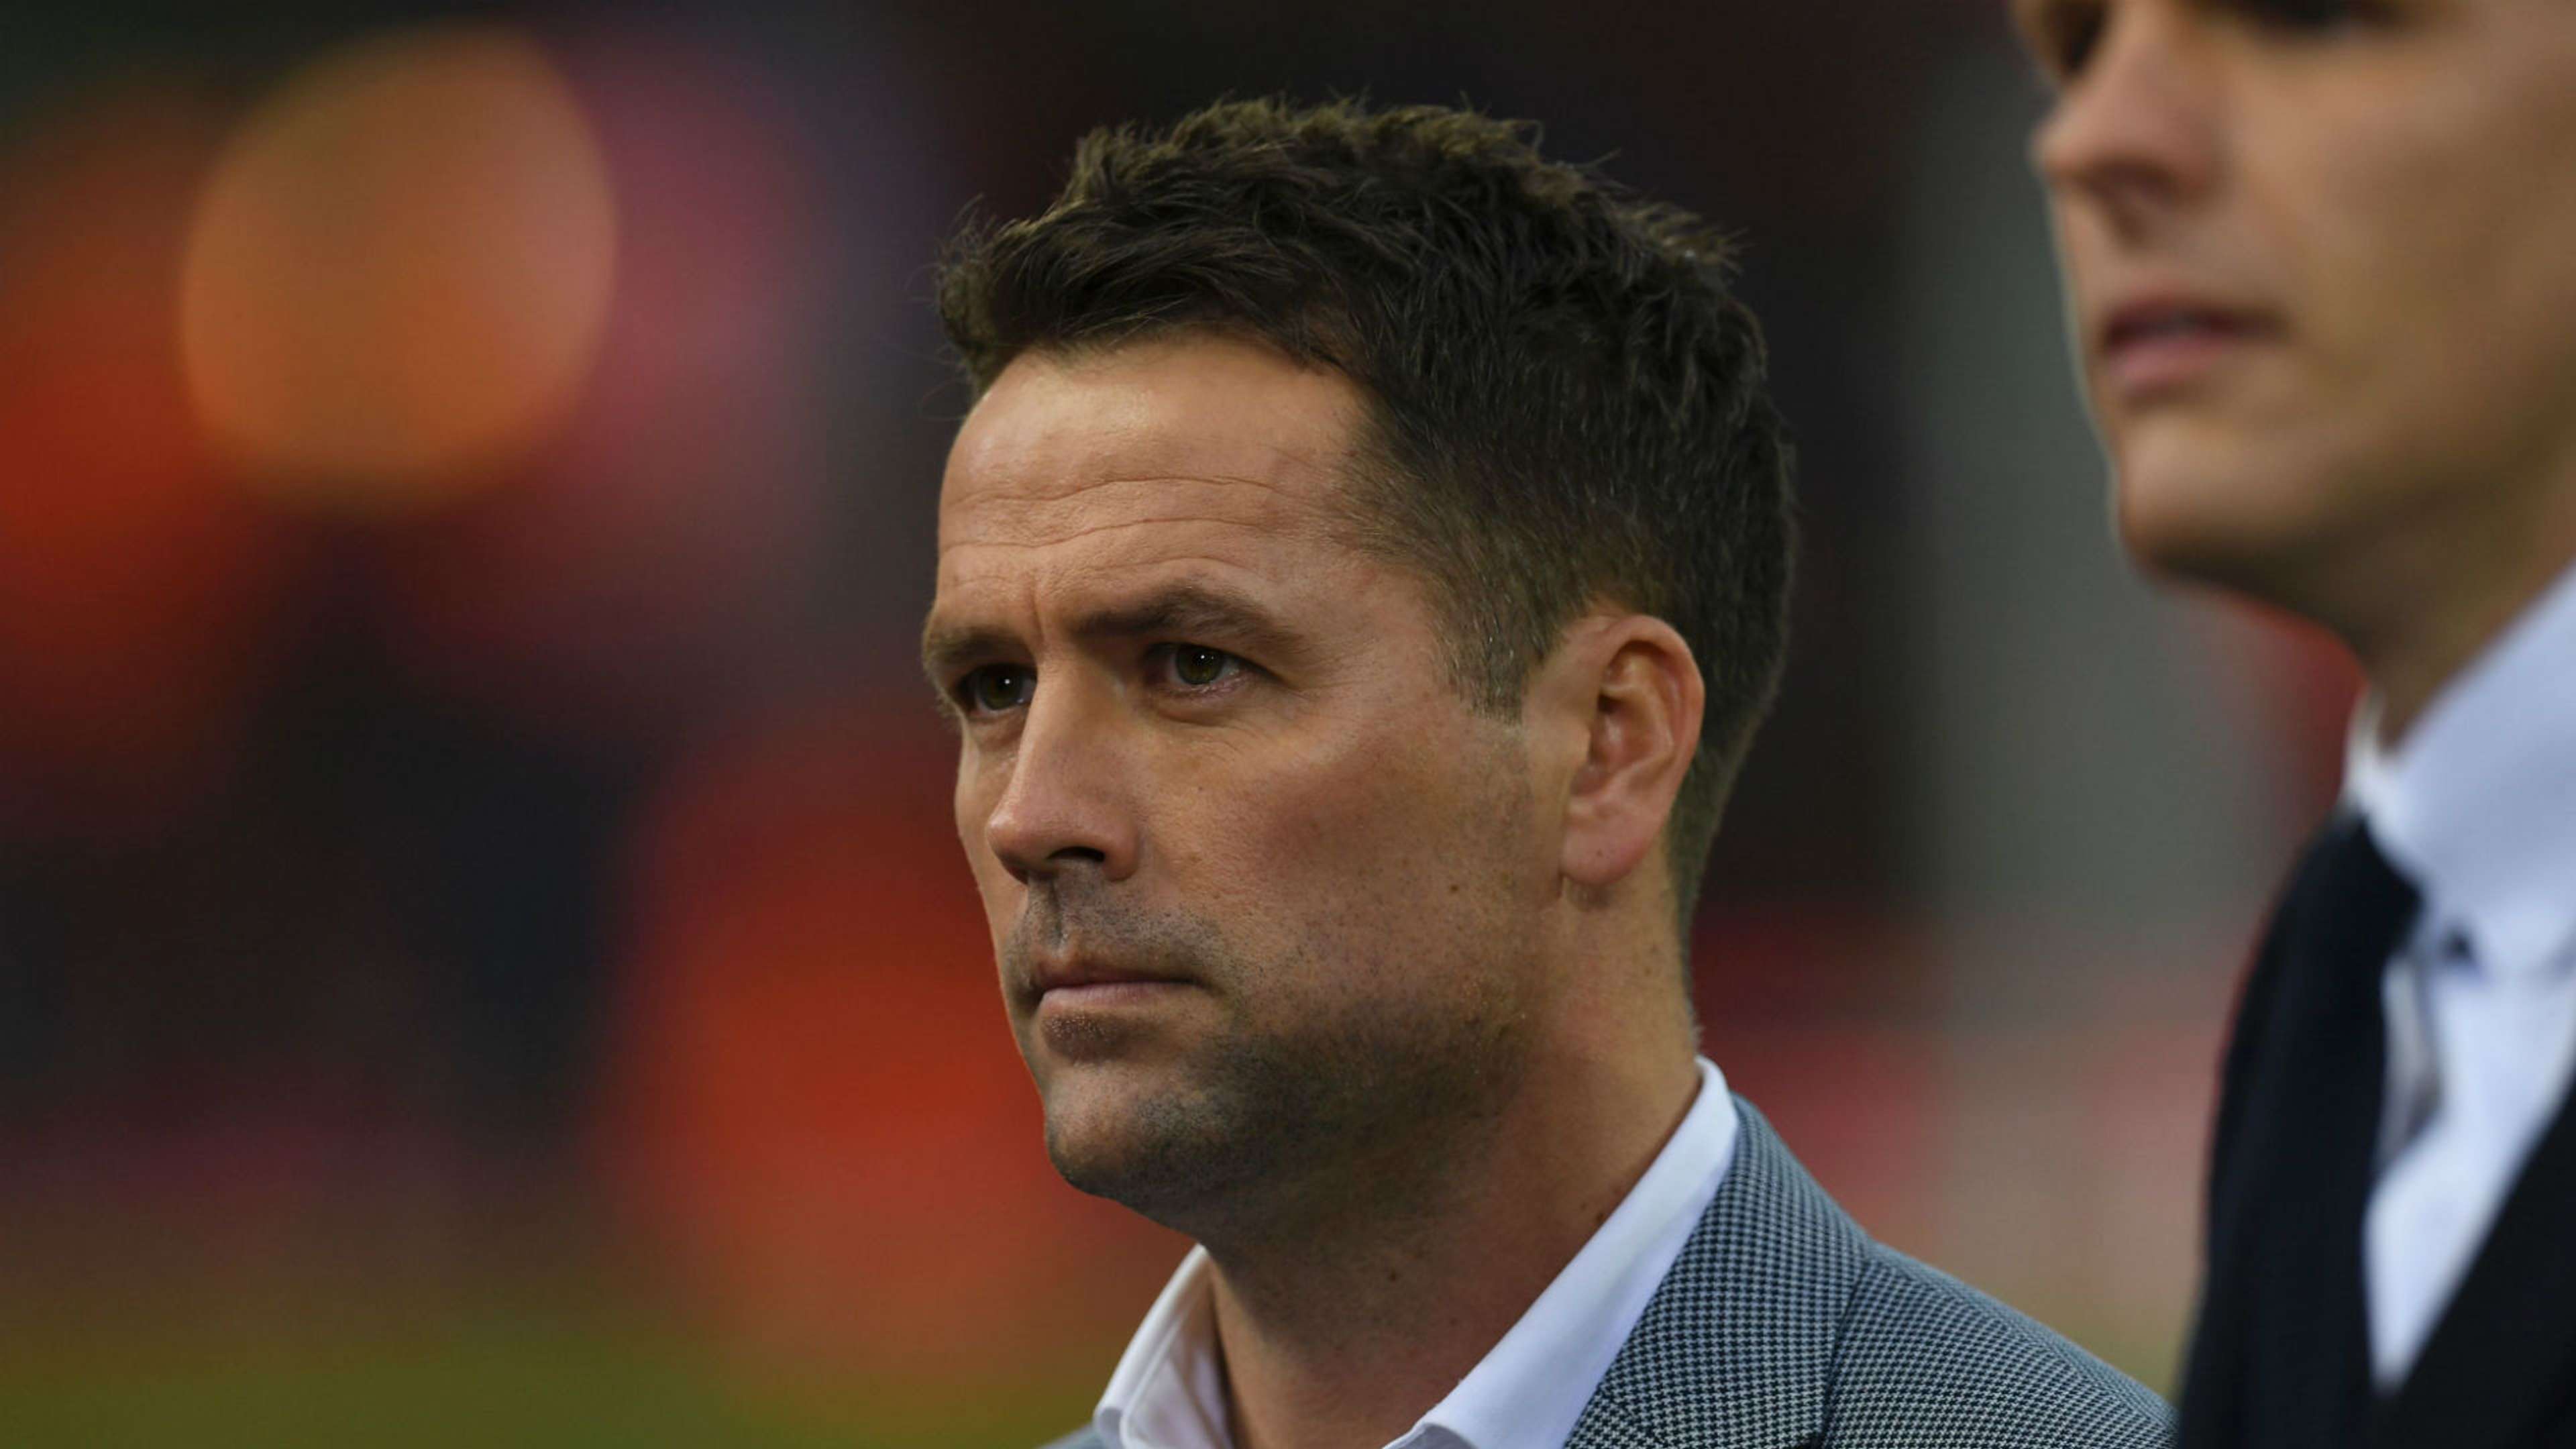 Michael Owen, former Liverpool and Real Madrid striker